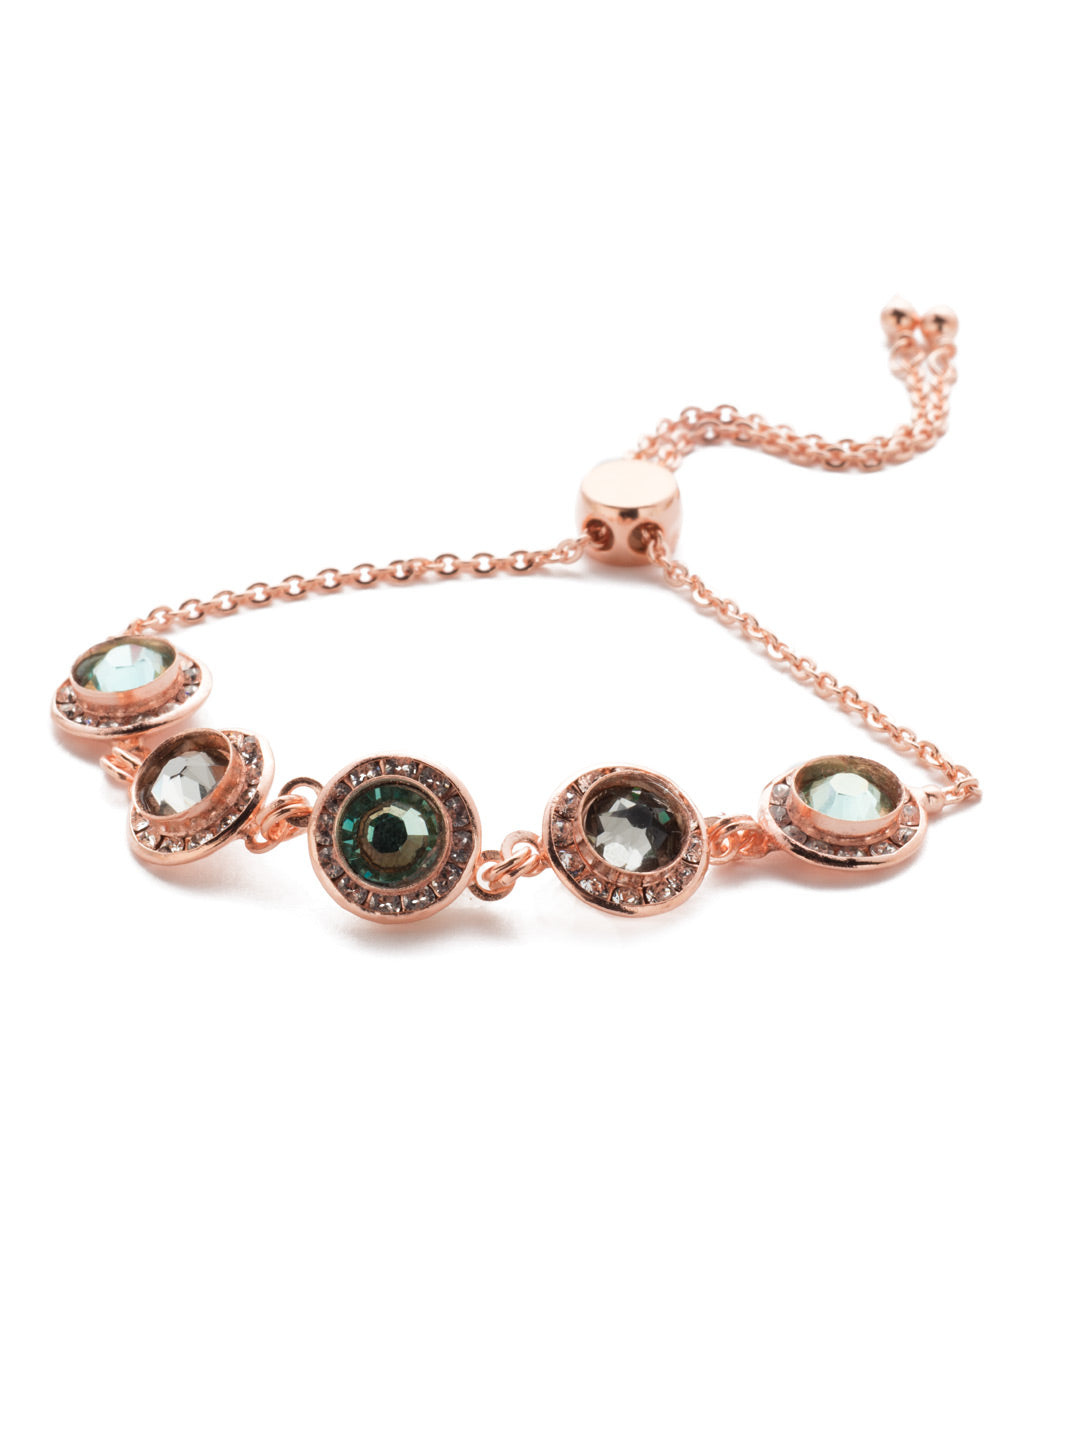 Saylor Slider Bracelet - BET14RGCAZ - When you're torn between a vintage and edgy look, the Saylor Slider Bracelet is your girl. With both sparkling and muted crystal pieces, it's a truly versatile piece. From Sorrelli's Crystal Azure collection in our Rose Gold-tone finish.